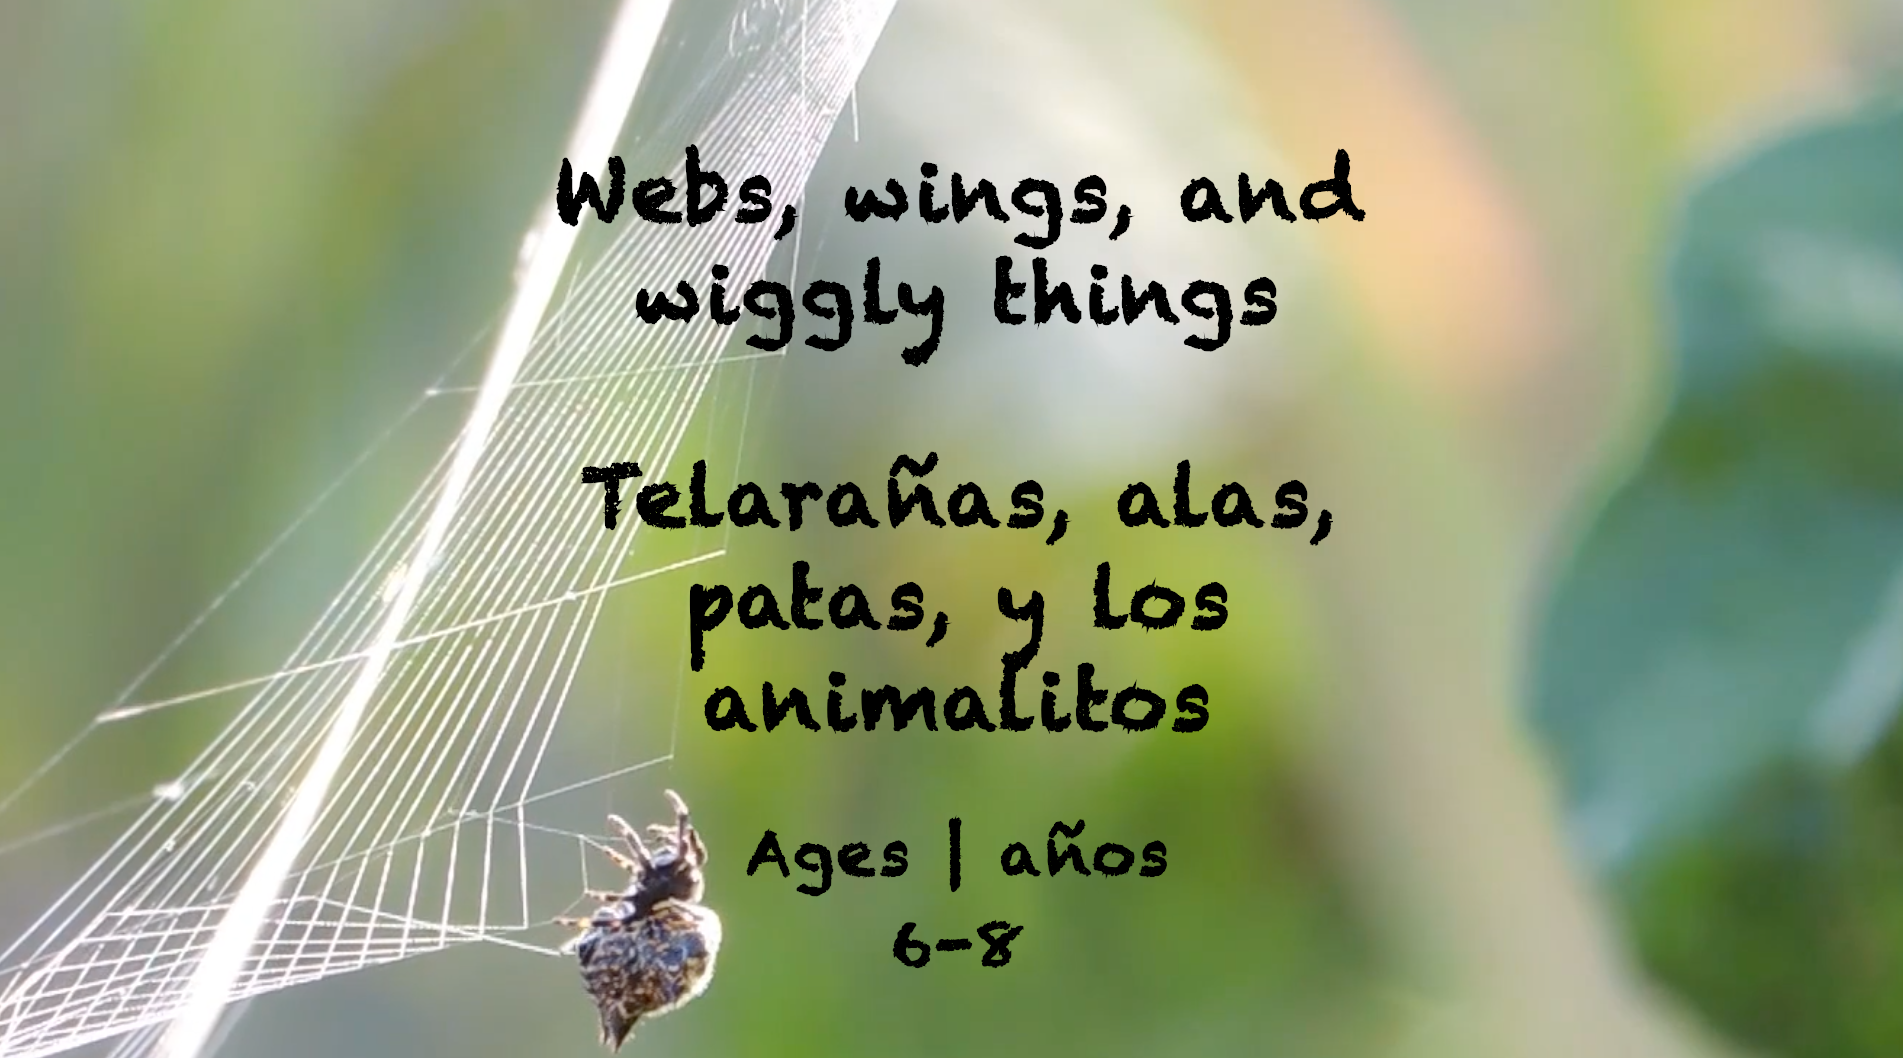 Webs, Wings, and Wiggly Things for 6-8 year olds